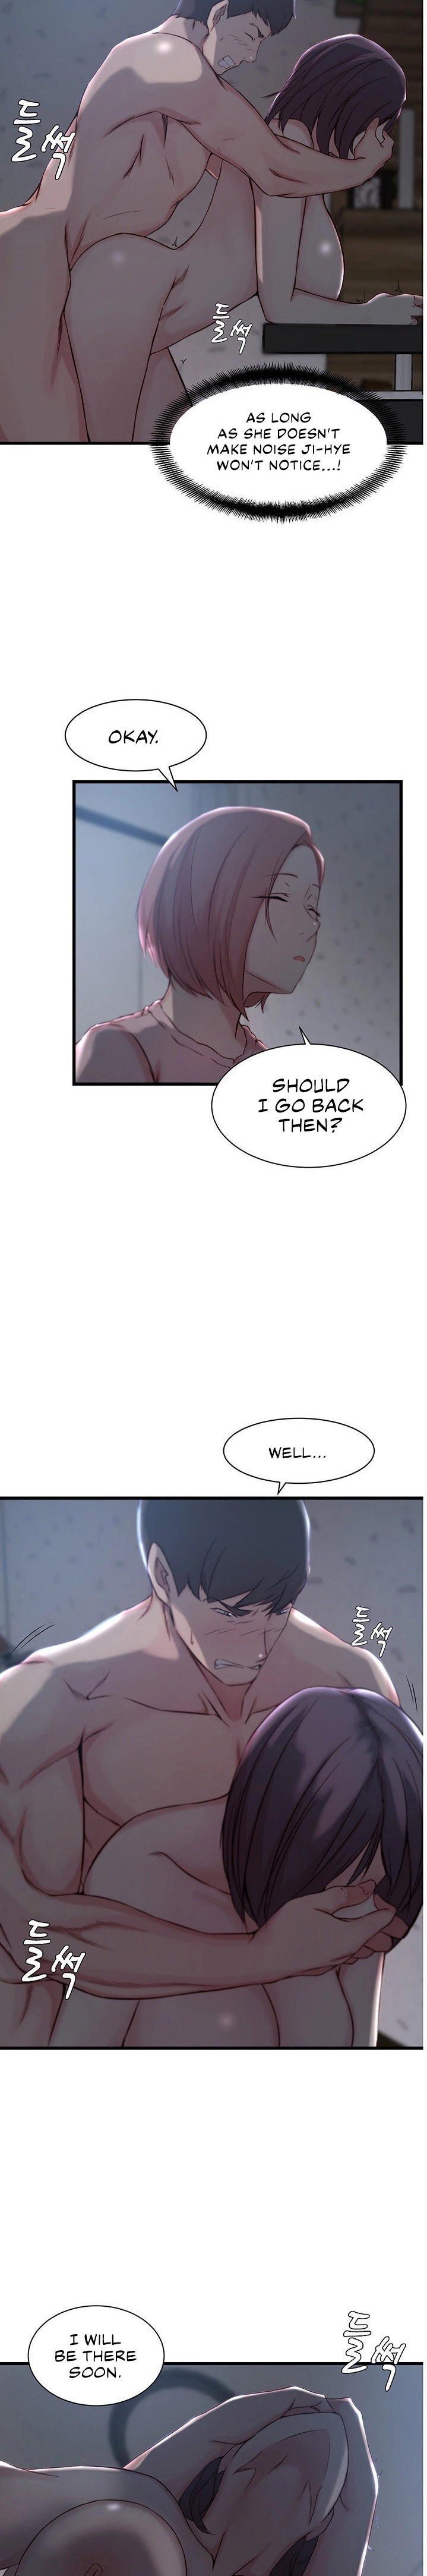 Sister-in-Law Manhwa - Chapter 13 Page 9